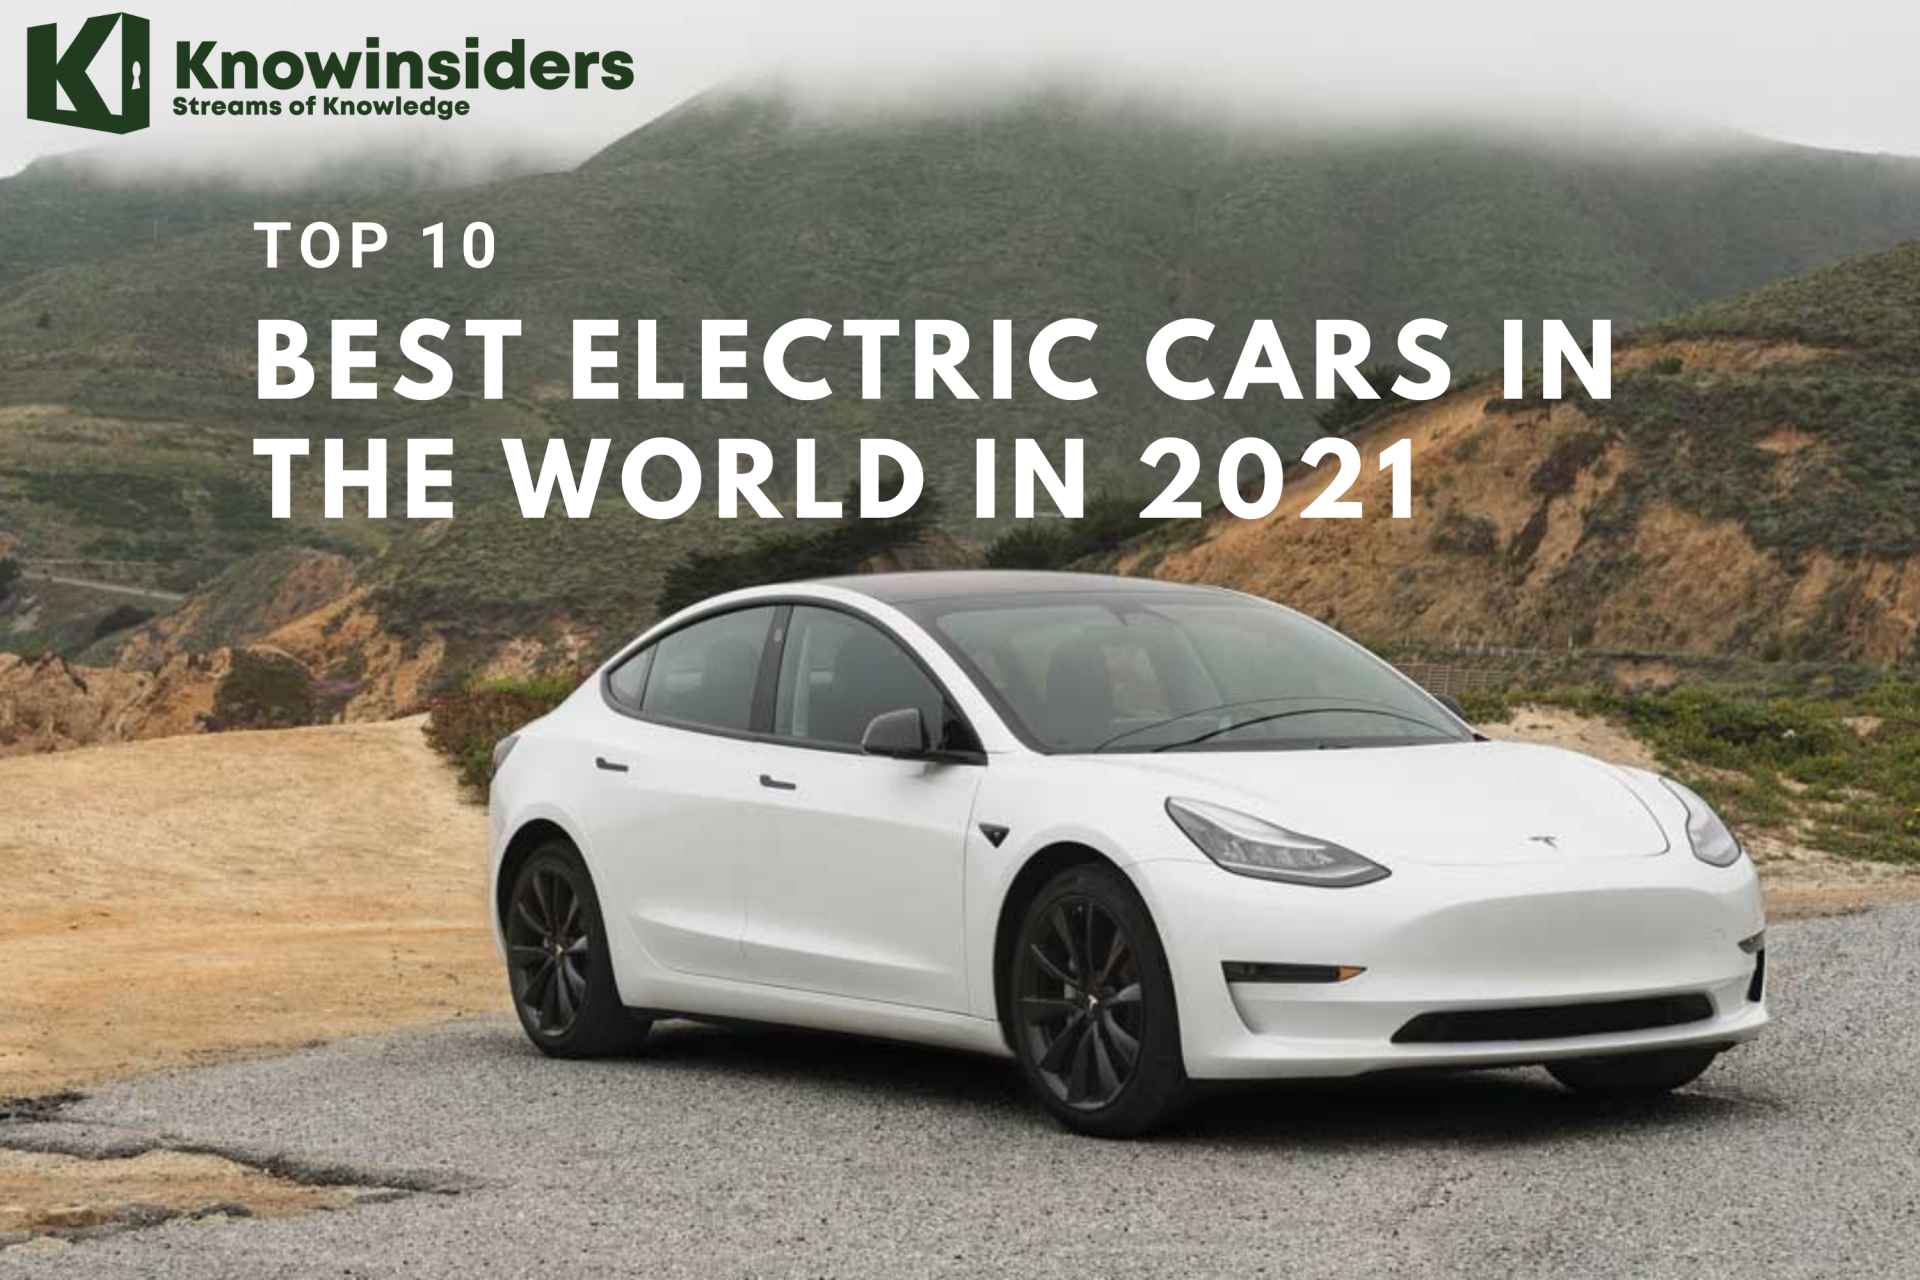 Top 10 Best Electric Cars in the World in 2021/2022